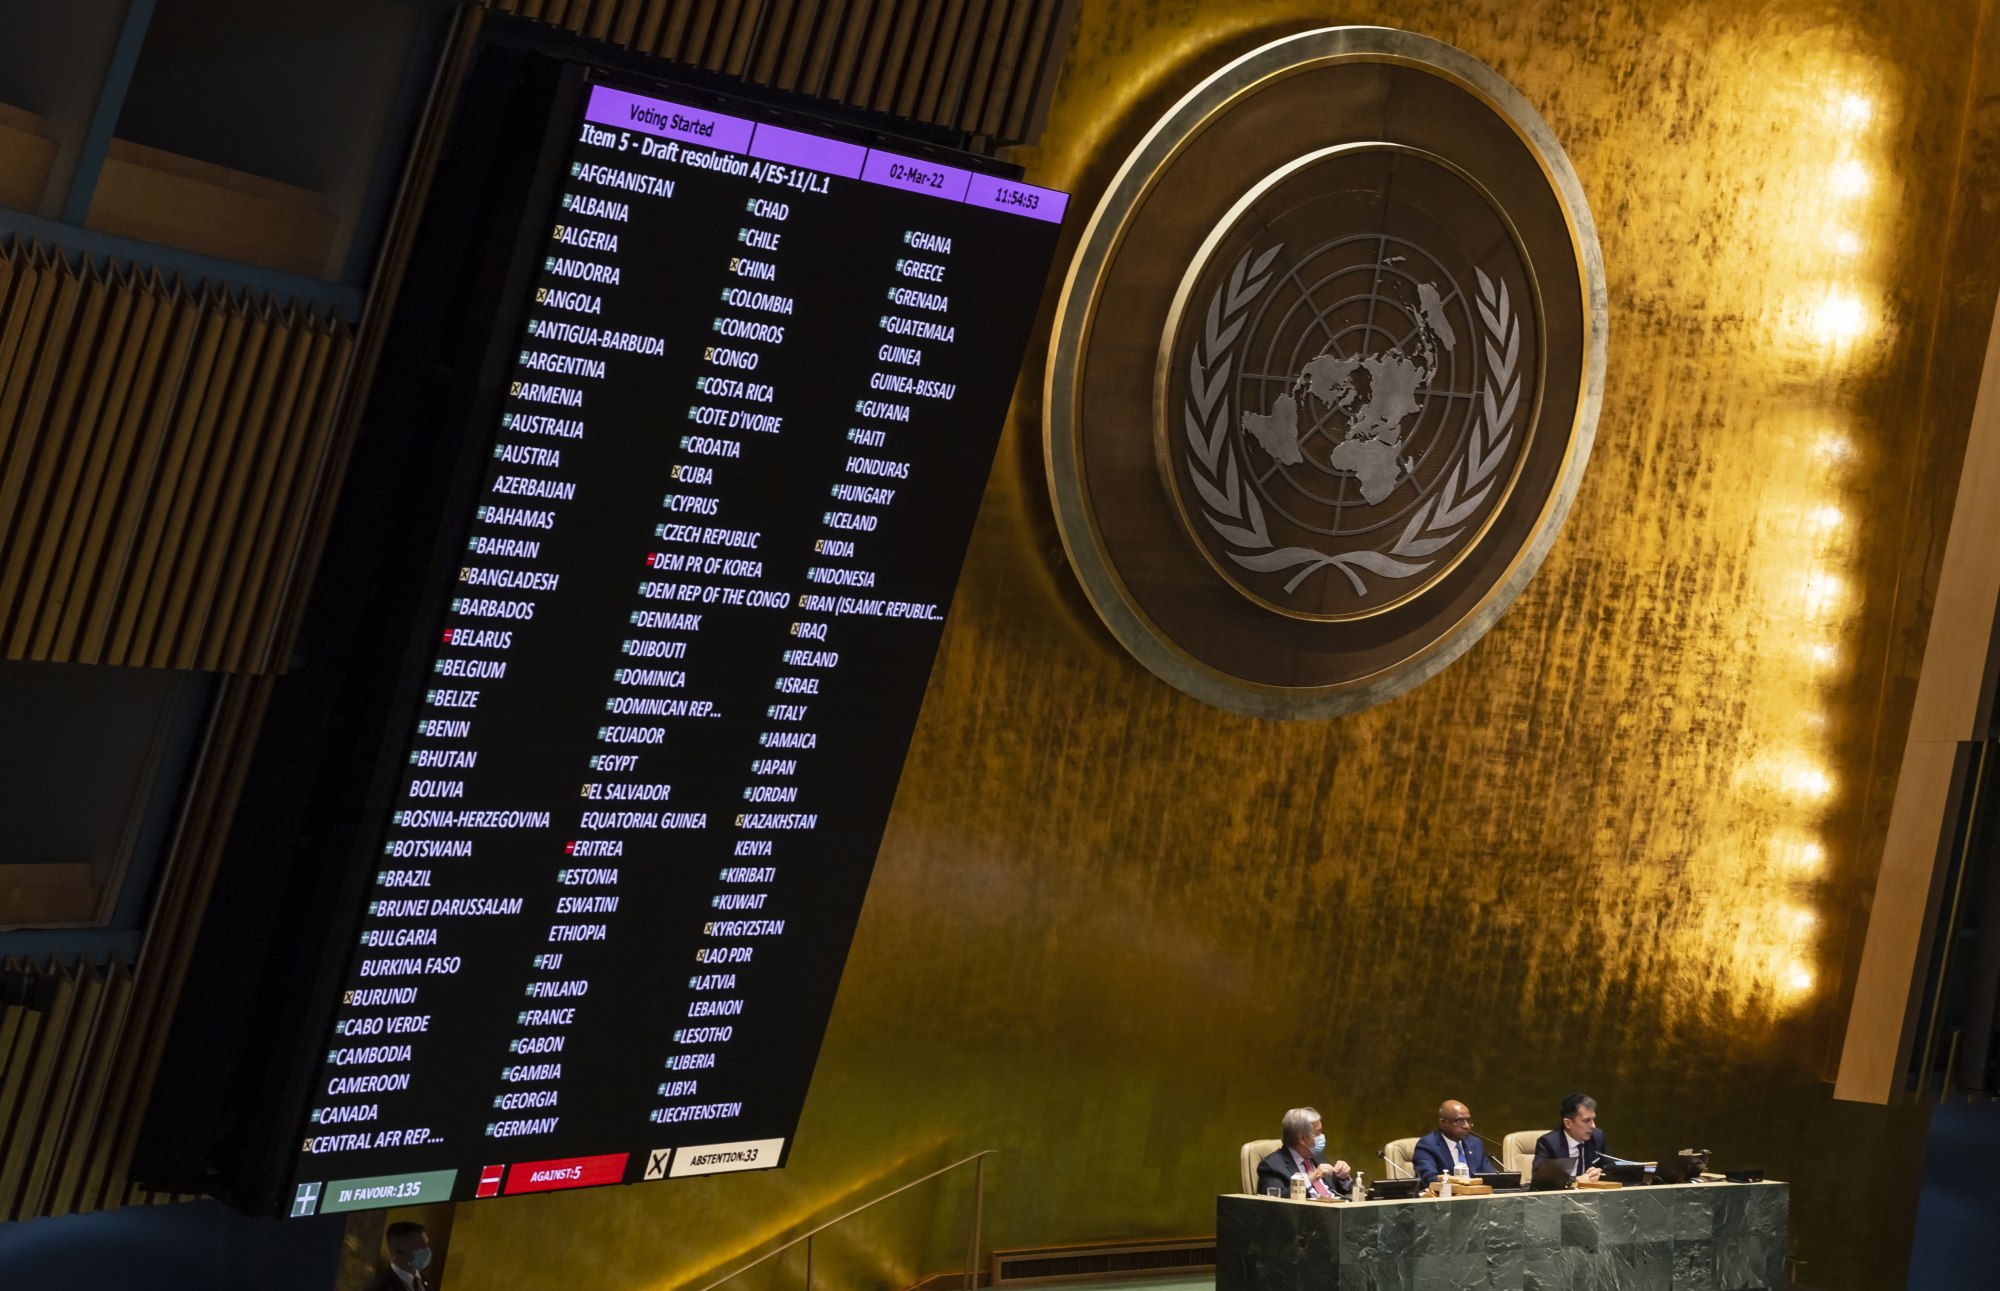 A screen shows results from a vote on a resolution condemning Russia’s invasion of Ukraine, during an emergency session of the United Nations General Assembly in New York, on March 2, 2022. Photo: EPA-EFE